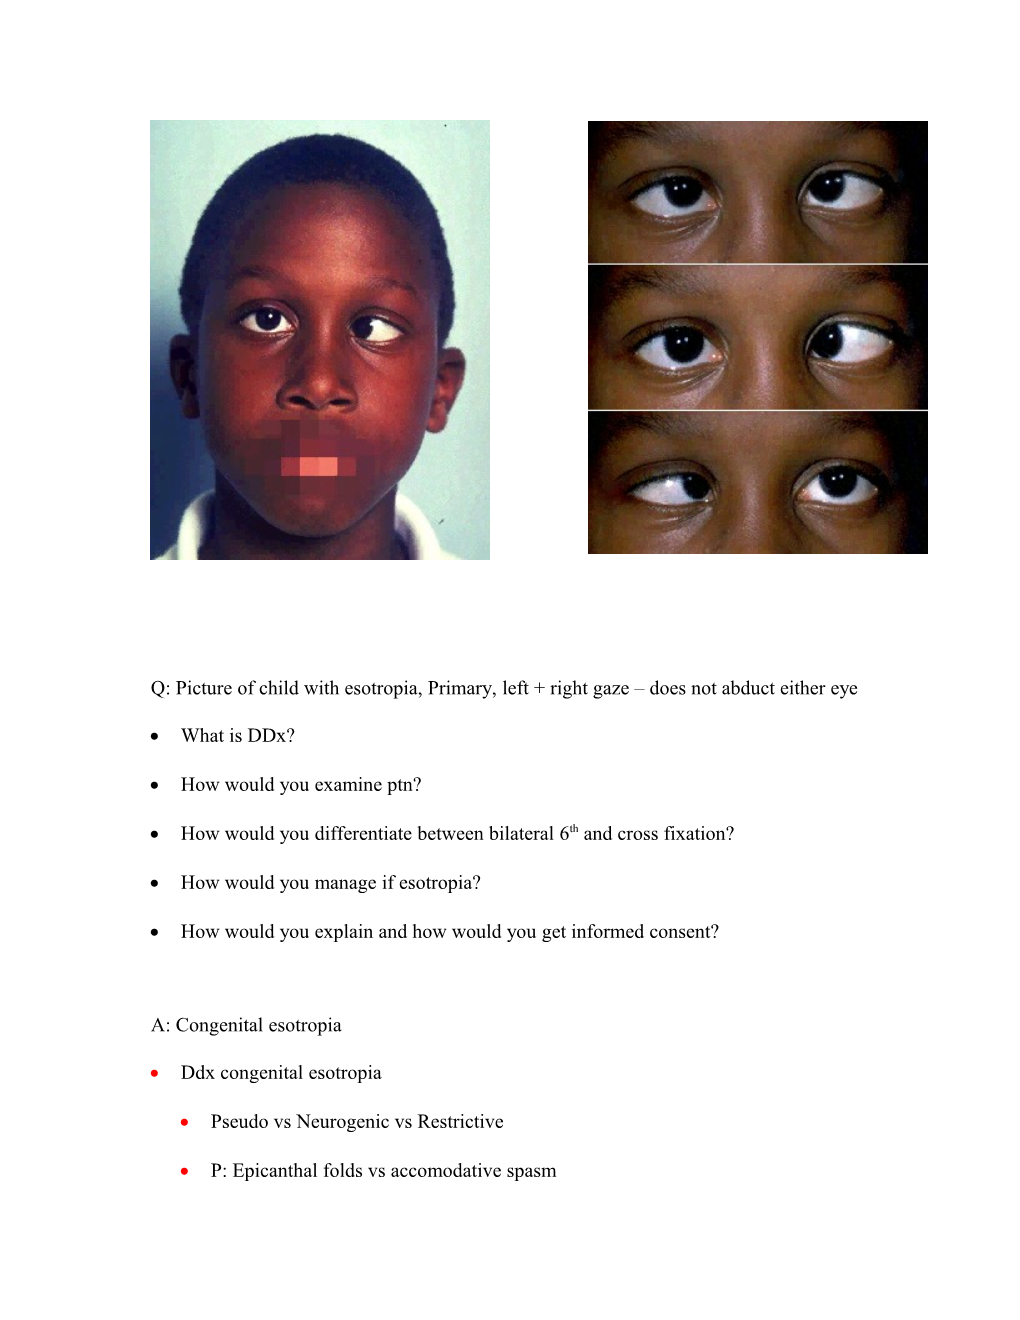 Q: Picture of Child with Esotropia, Primary, Left + Right Gaze Does Not Abduct Either Eye